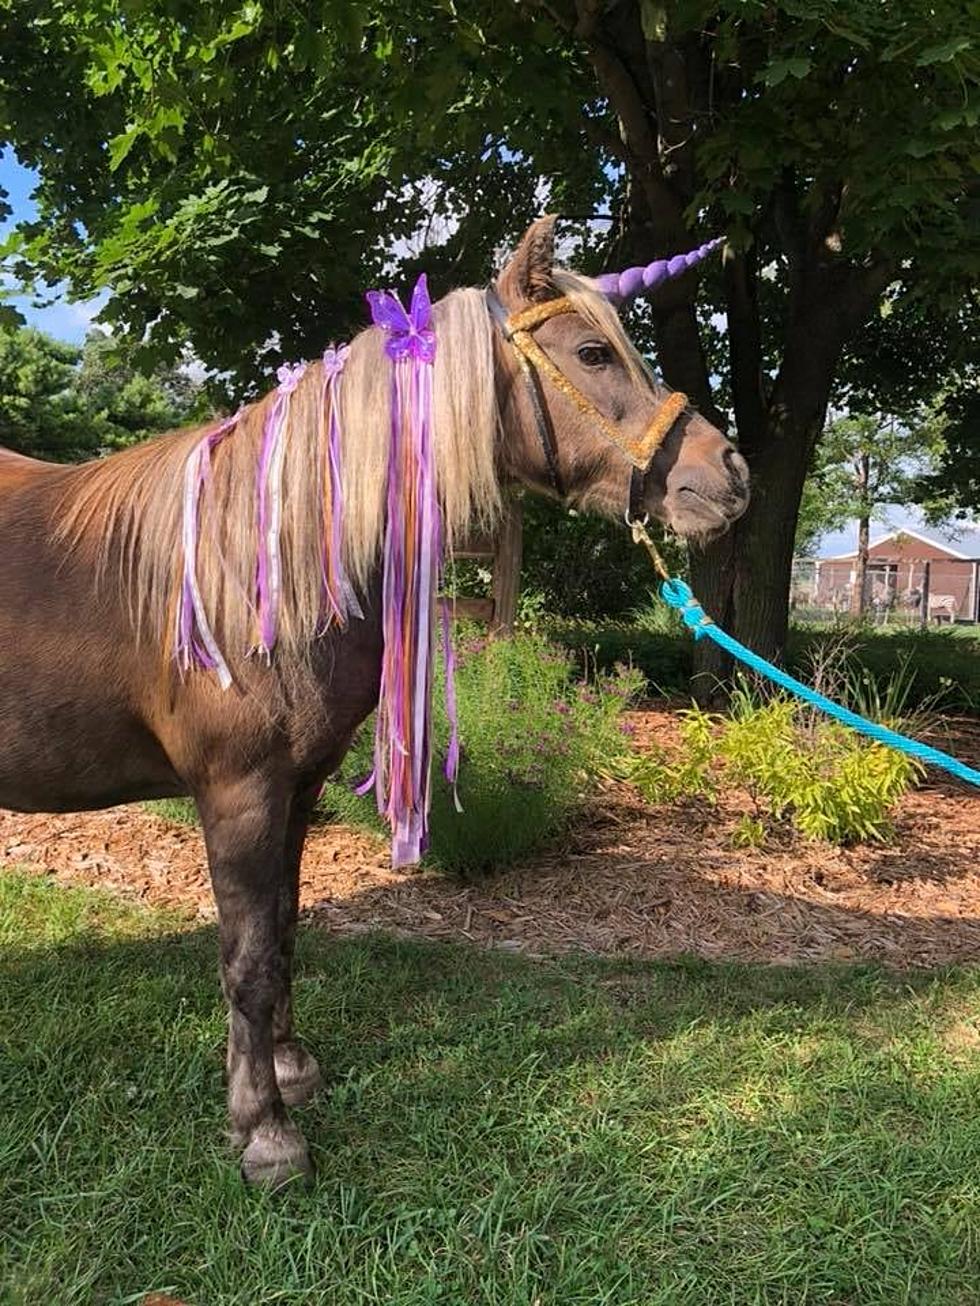 Calling All Kids! Unicorns Are Back at Belvidere&#8217;s Summerfield Zoo